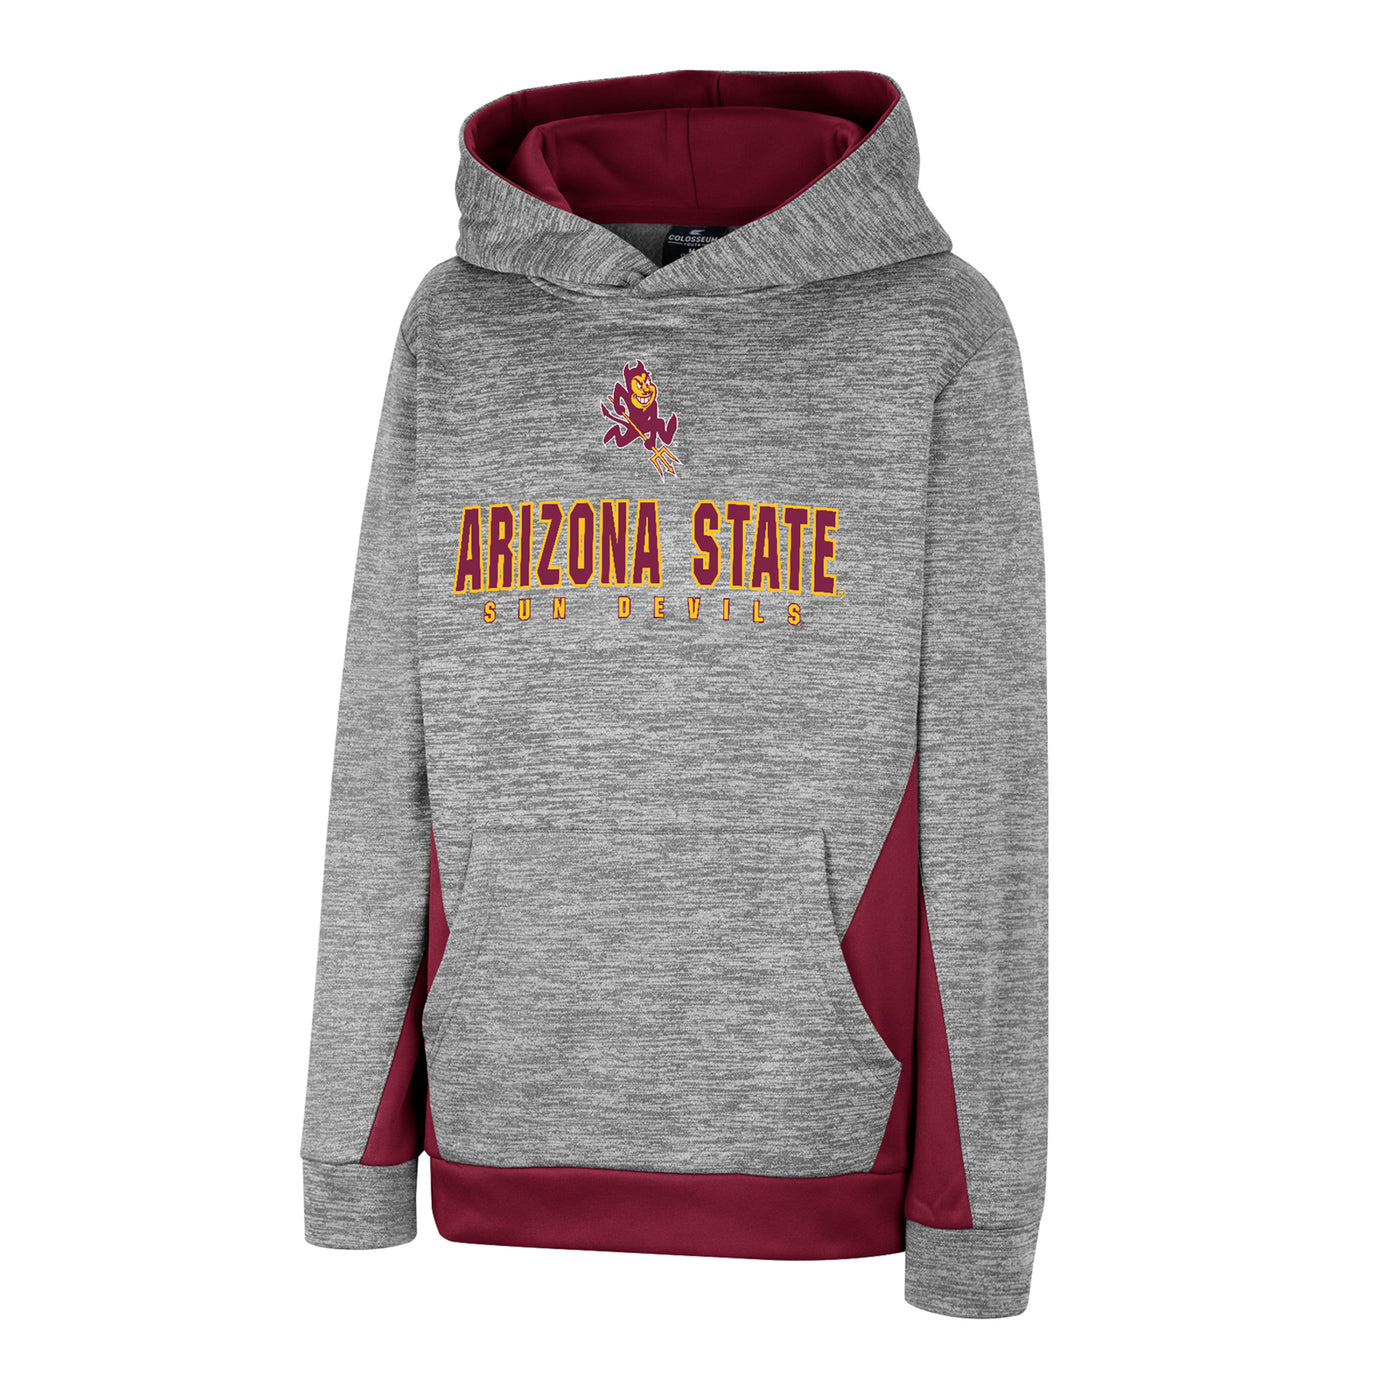 ASU youth hoody with heather gray body and maroon accents with 'Arizona State Sun Devils' lettering